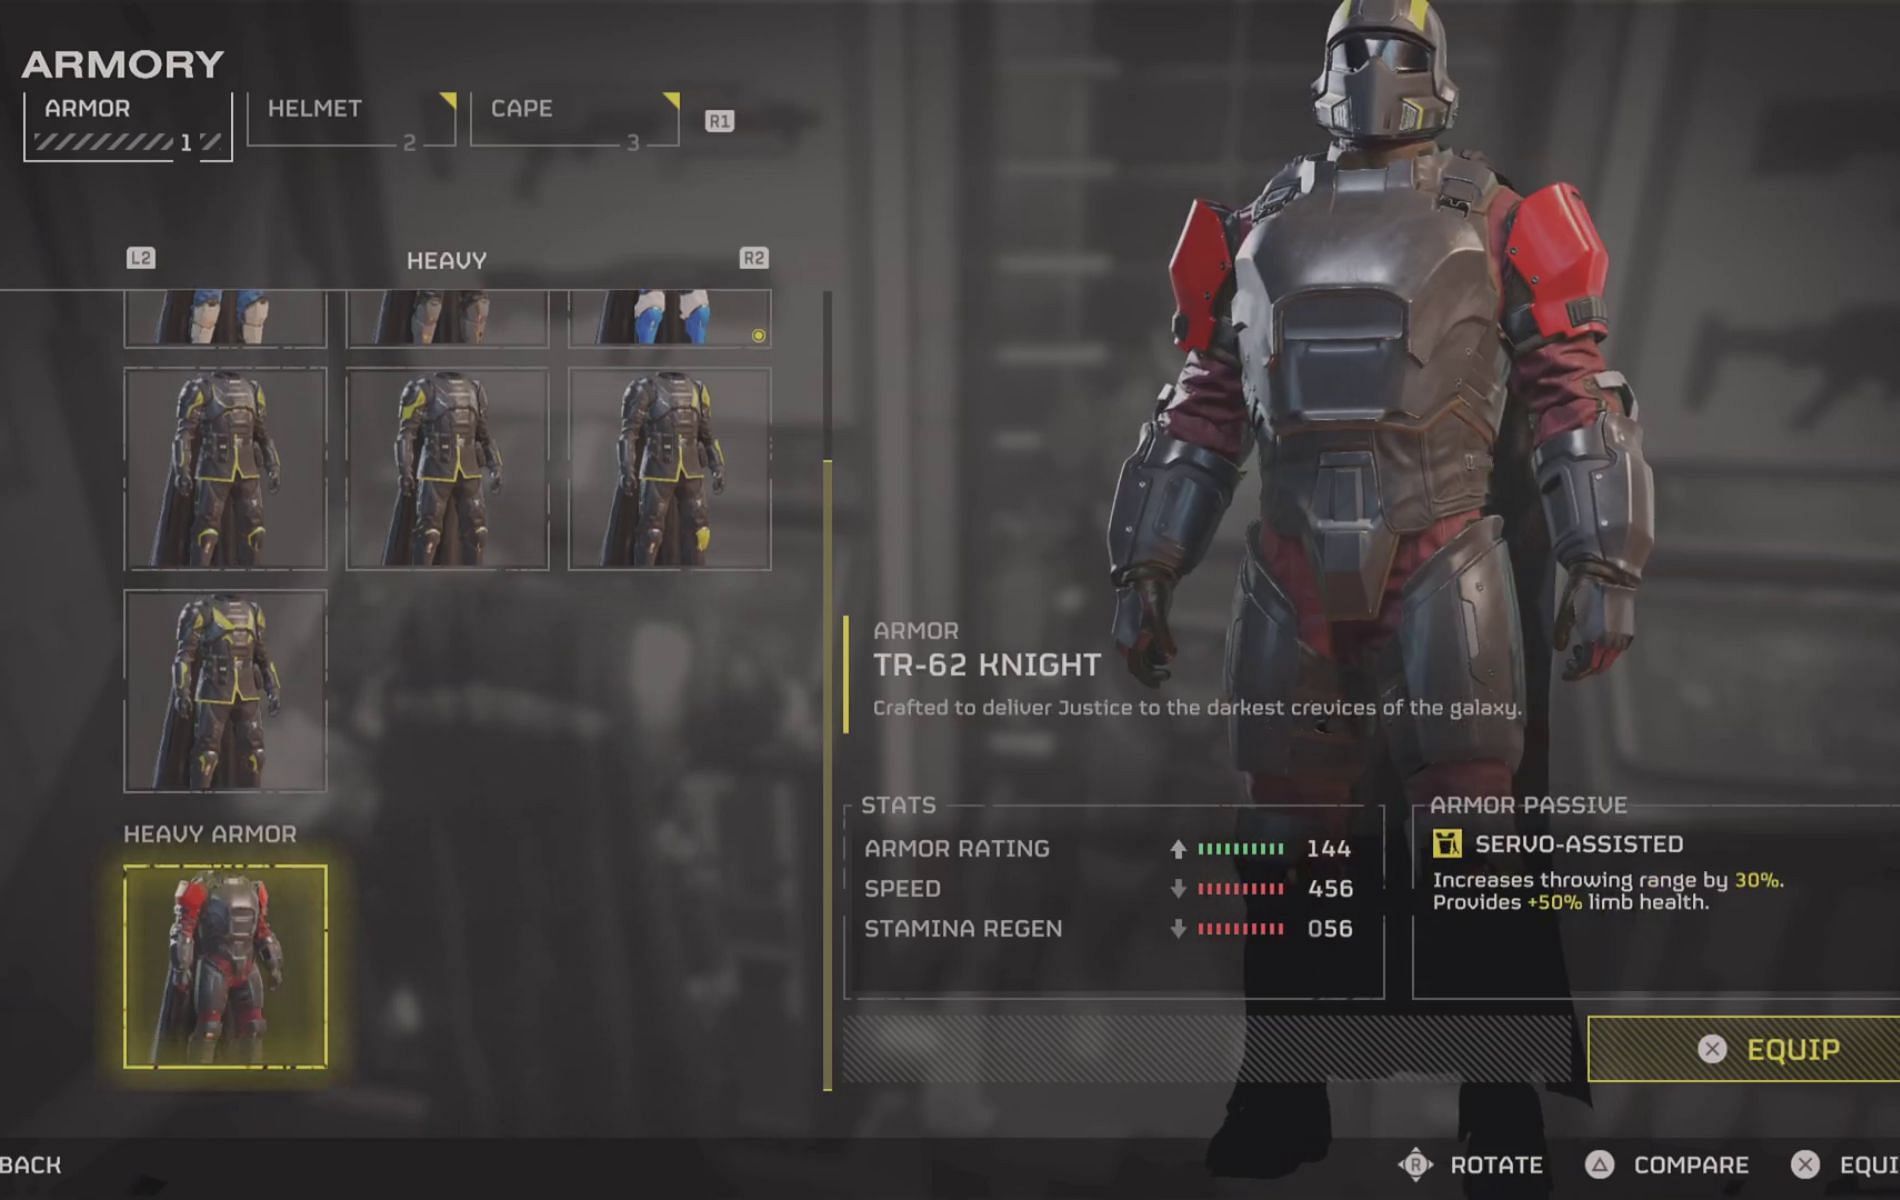 Players can change armor color in Helldivers 2 by swapping out gear pieces in armory.